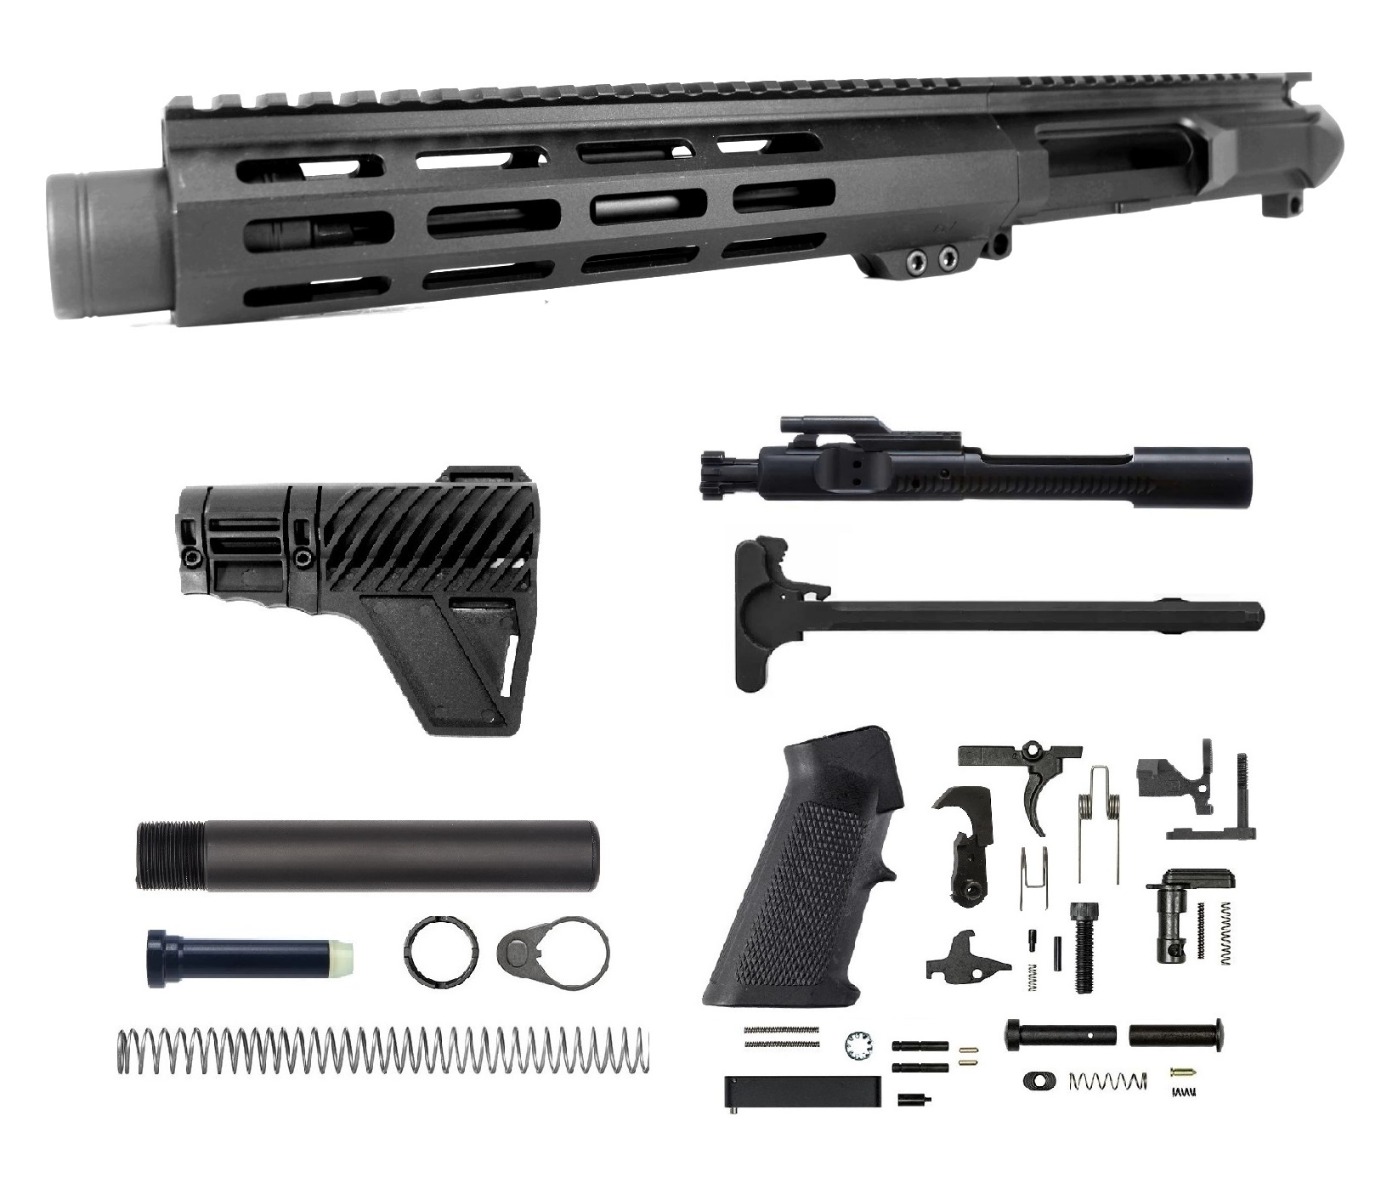 PRO2A LEFT HAND 7.5" 7.62x39 1/10 Pistol Length Melonite M-LOK AR-15 Upper with Flash Can Kit